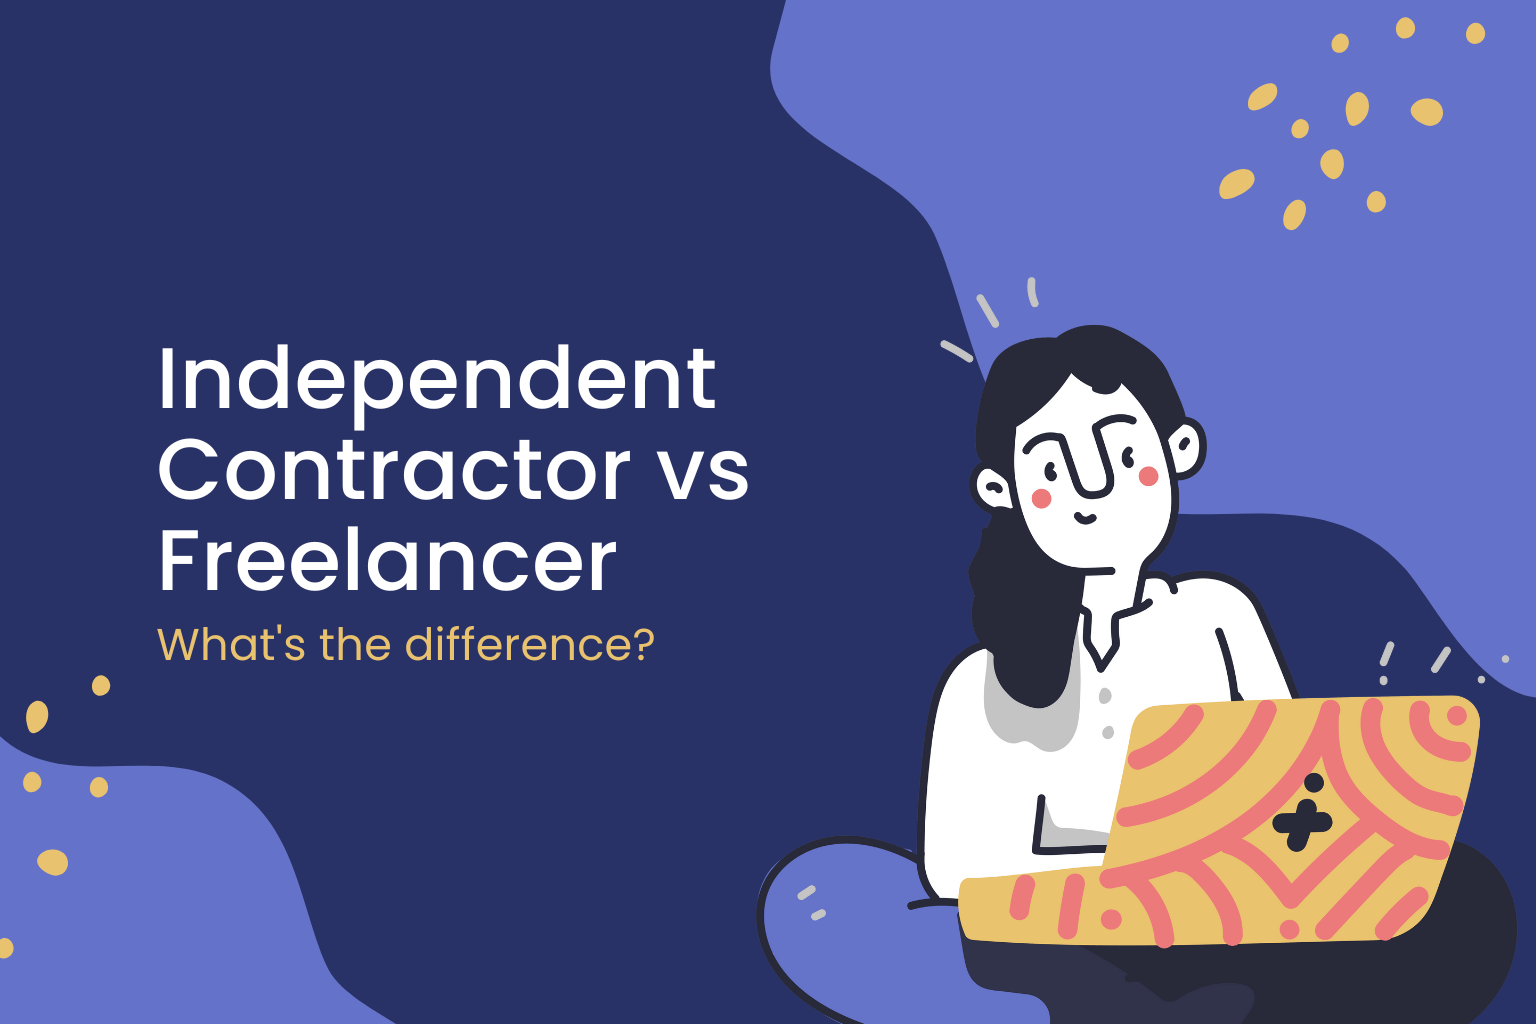 Independent Contractor vs Freelancer – What’s the Difference?